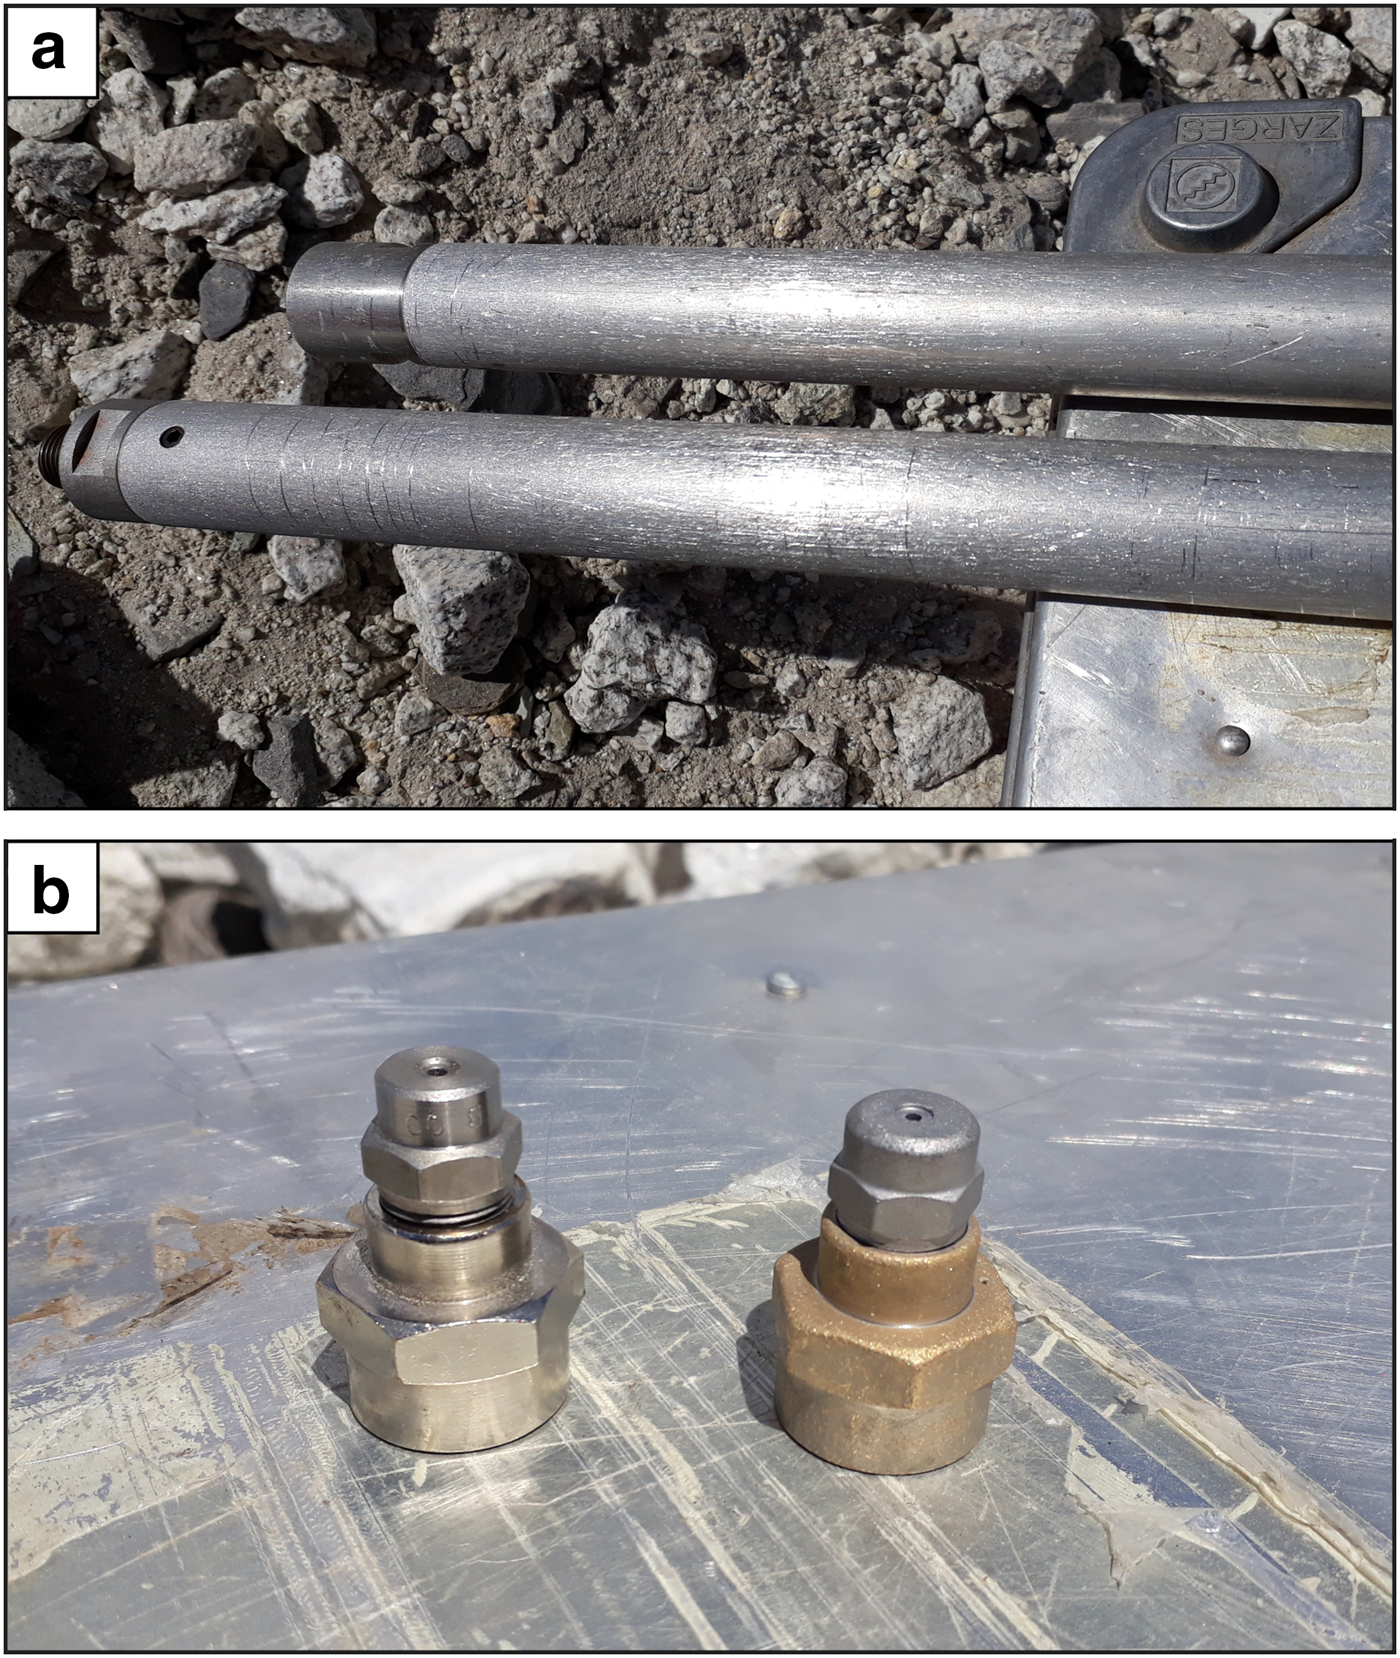 Instruments and methods: hot-water borehole drilling at a high-elevation  debris-covered glacier, Journal of Glaciology